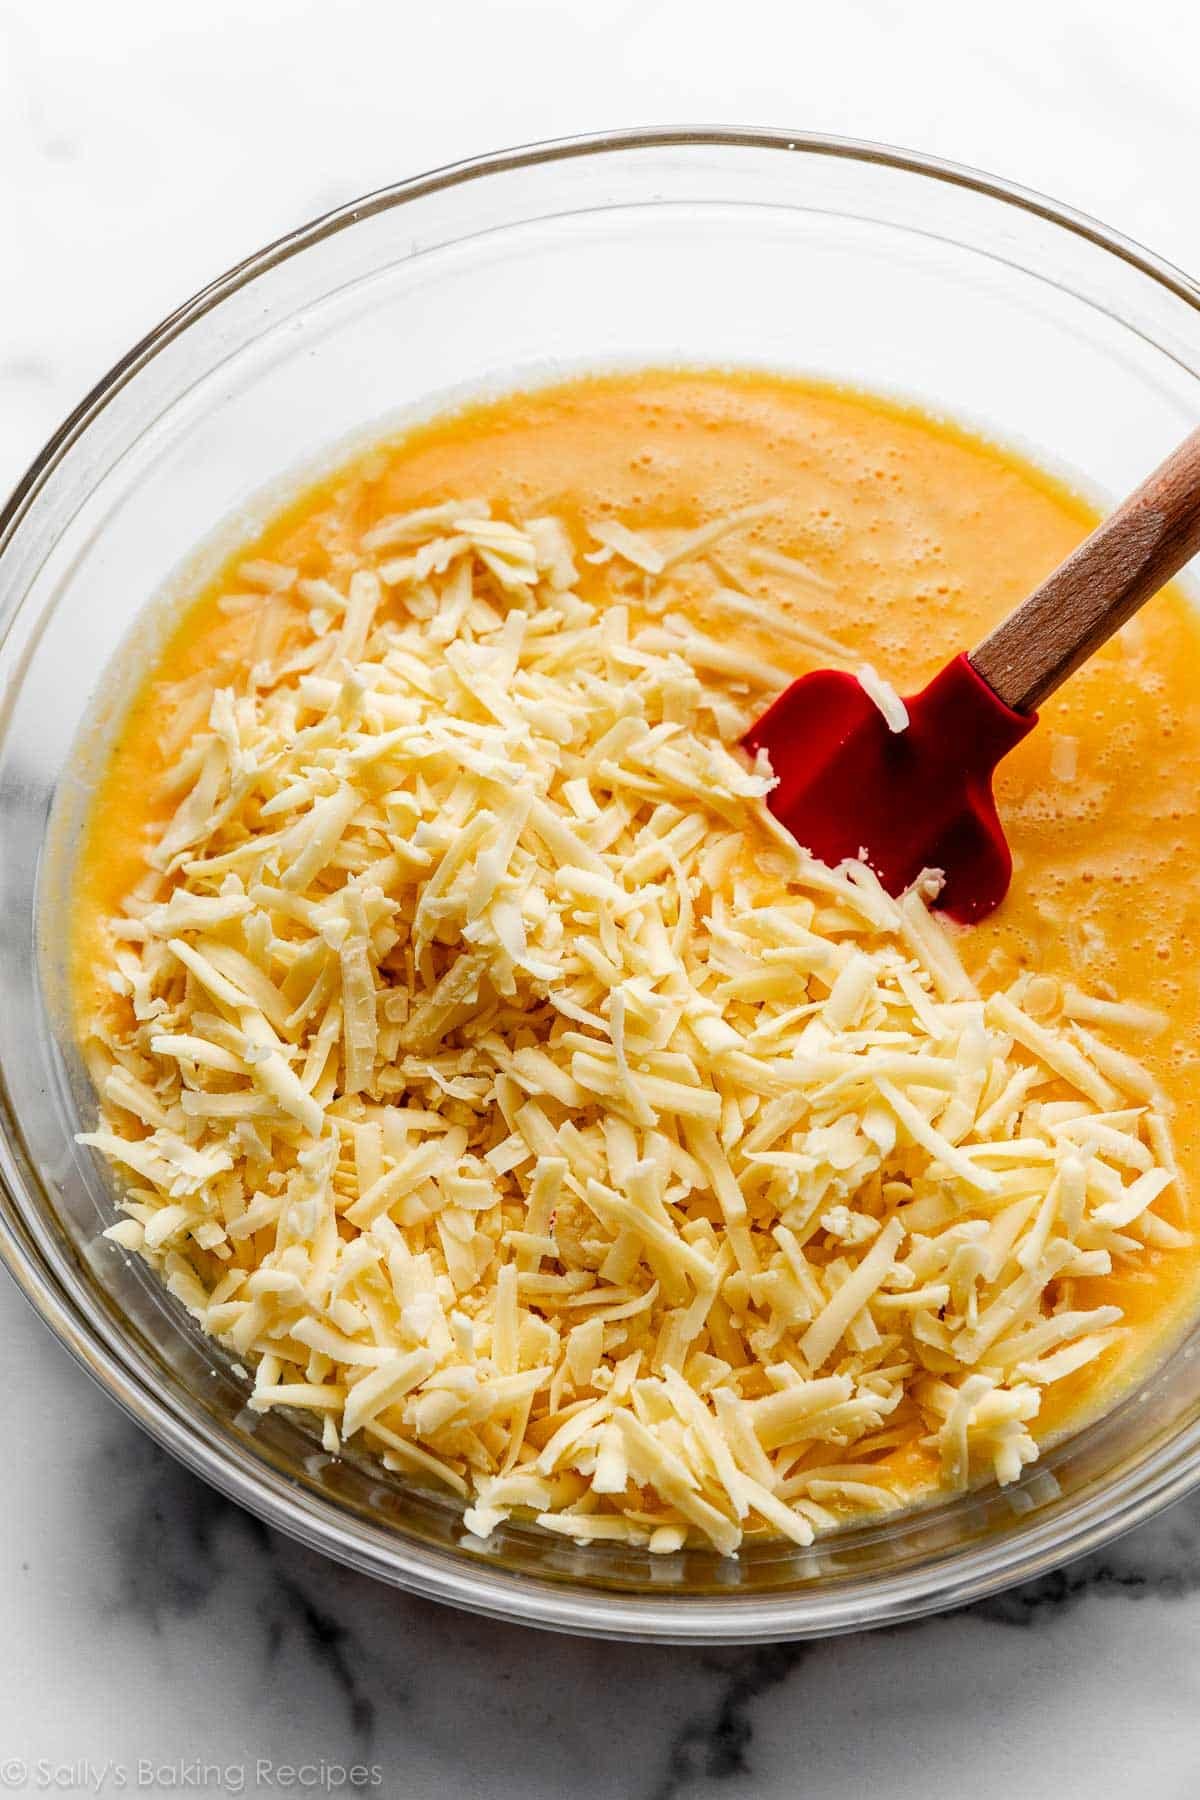 shredded gruyère cheese sitting on top of orange sauce in glass bowl with red spatula.